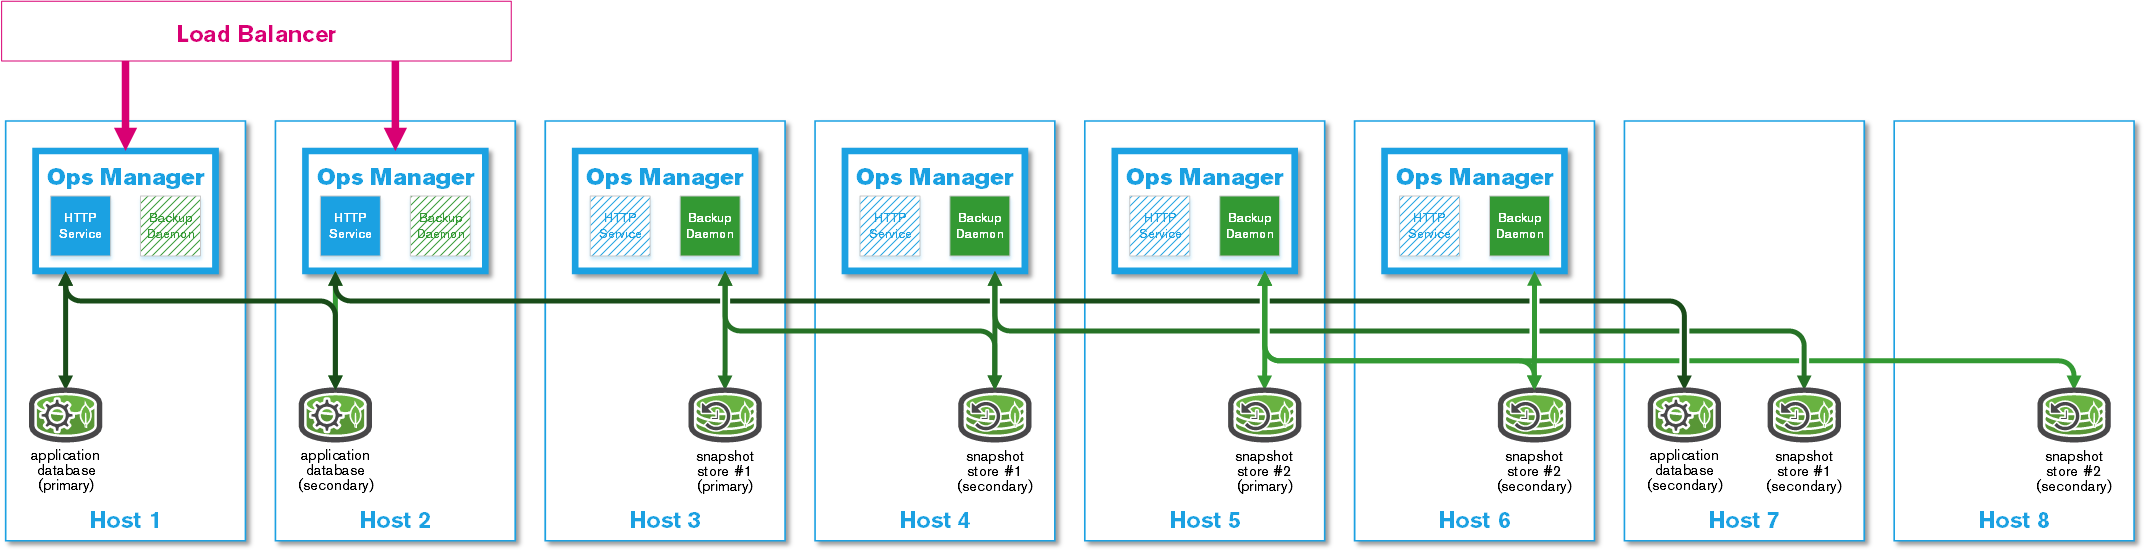 A highly available deployment uses horizontal scaling of the application database and snapshot store for backups, as well as multiple backup daemons.